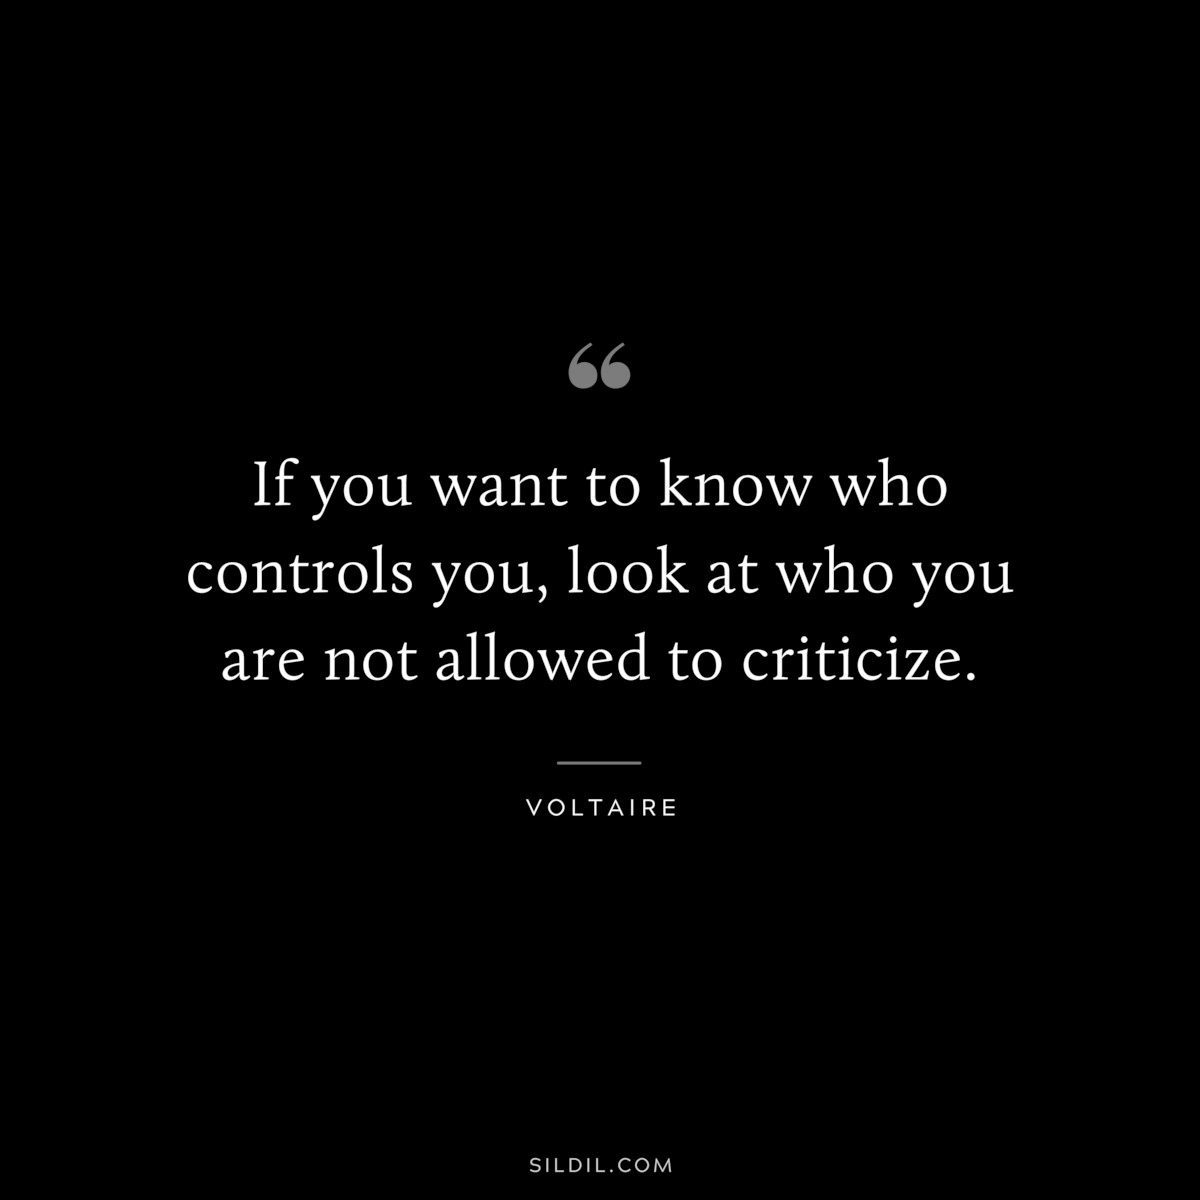 If you want to know who controls you, look at who you are not allowed to criticize. ― Voltaire